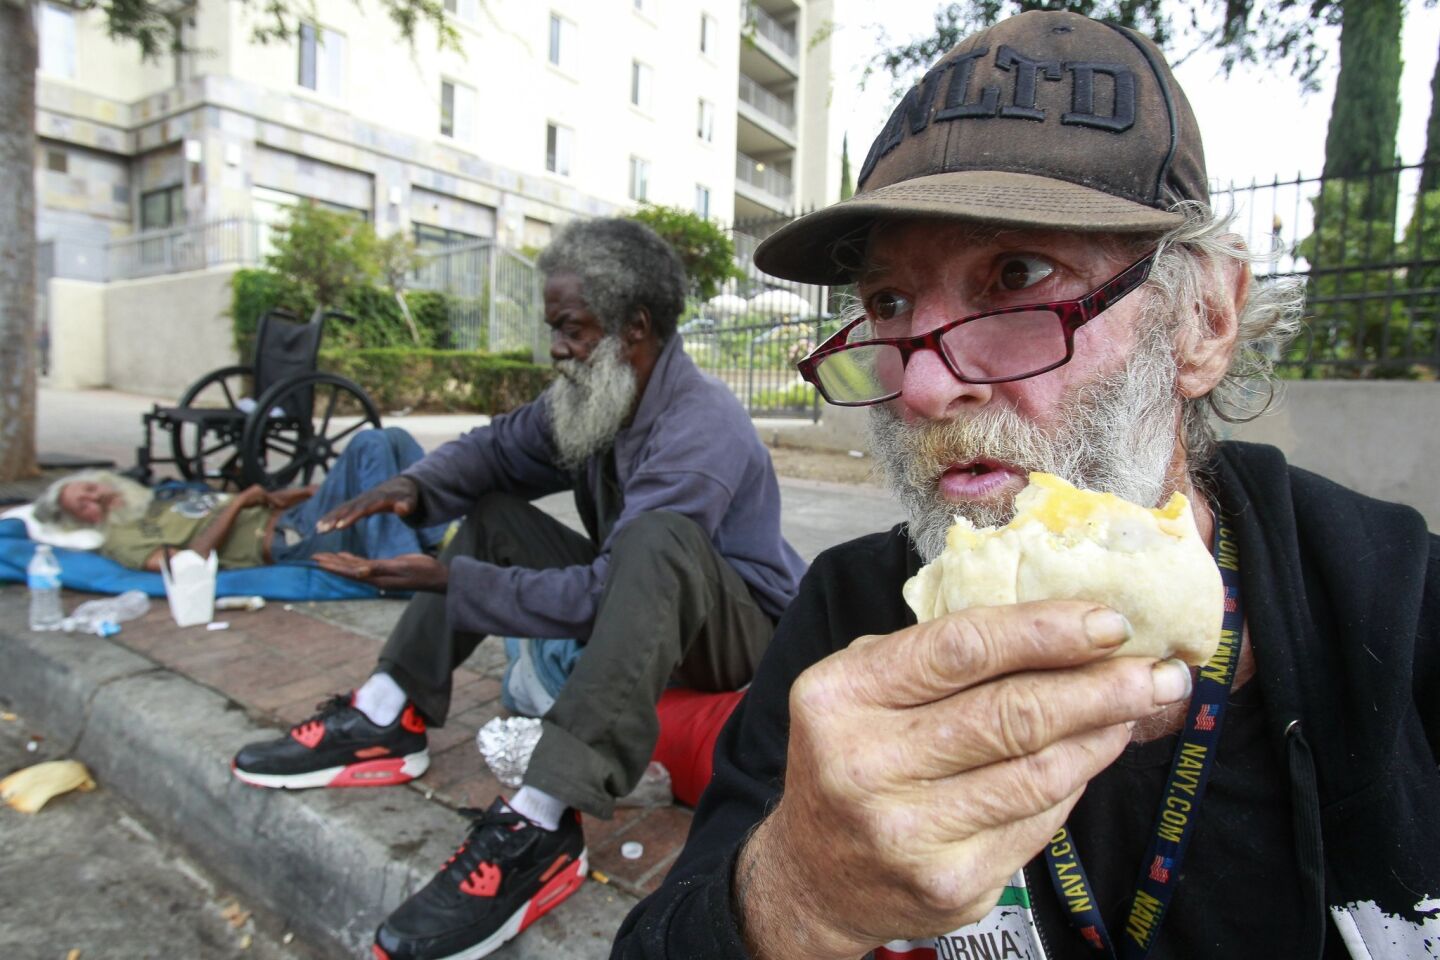 Michael Griffin, 67, who is homeless, eats an egg burrito given to him by Burrito Boyz in downtown San Diego.